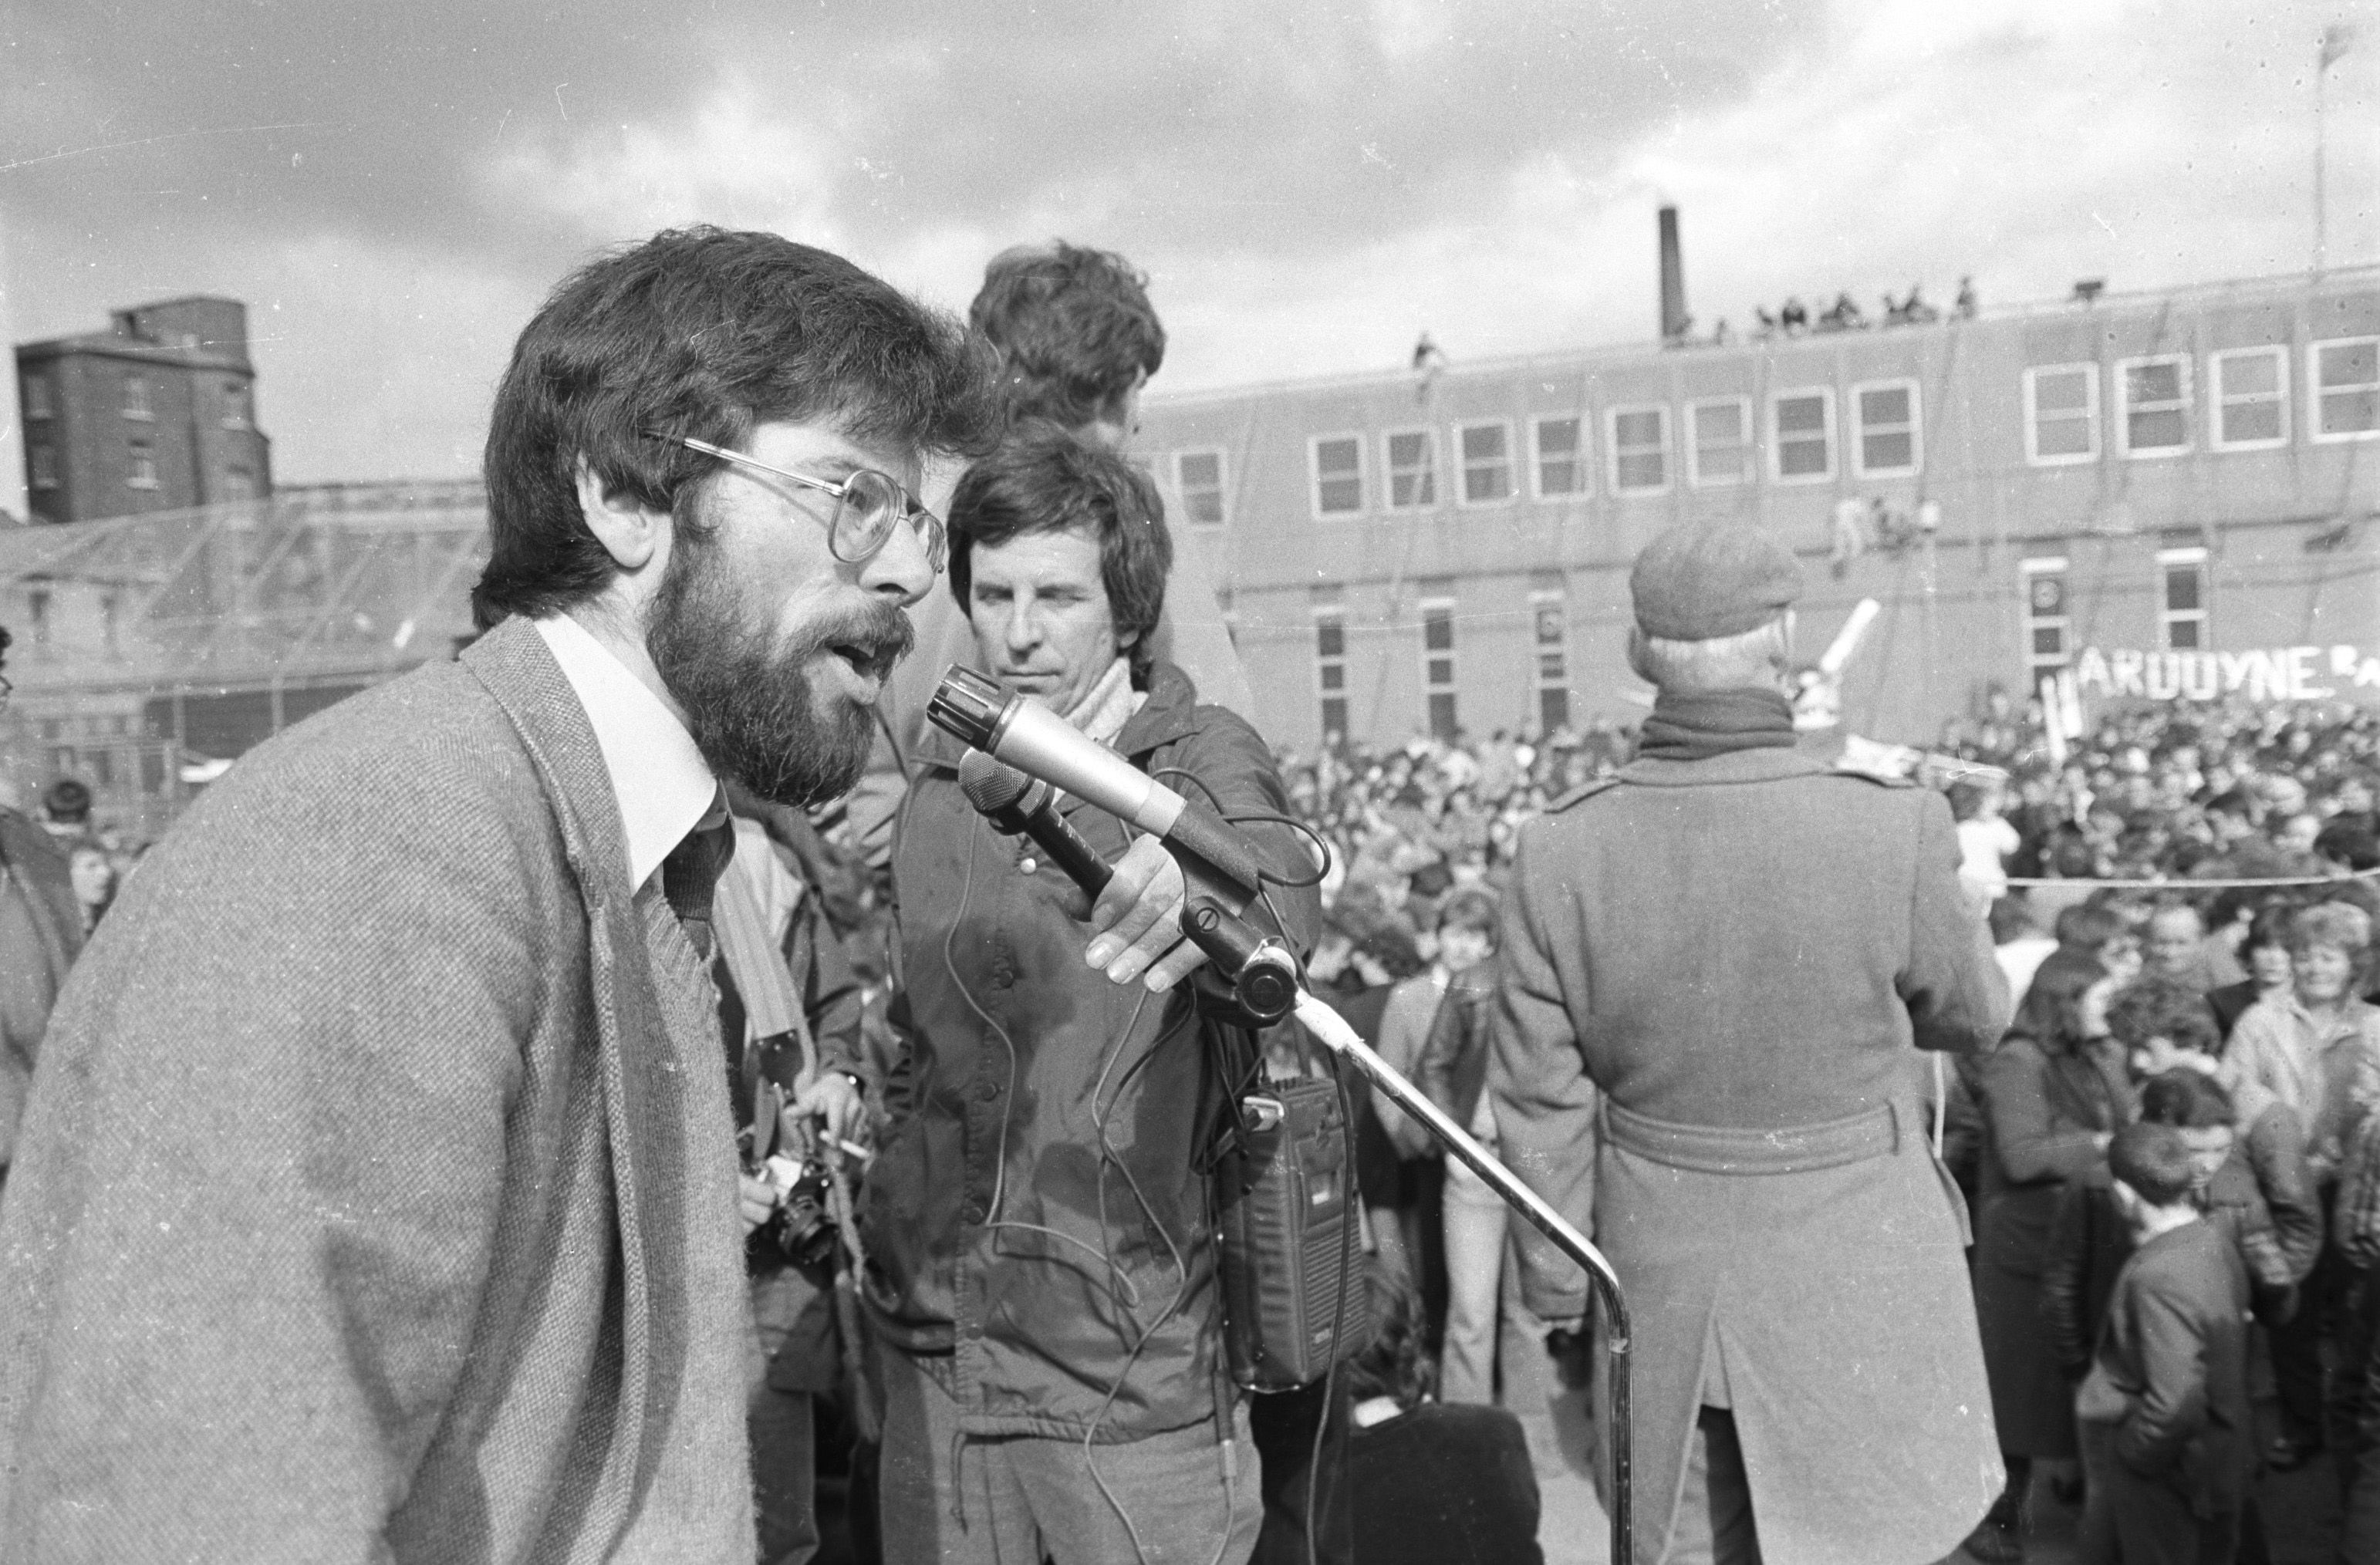 ELECTORAL POLITICS: Gerry Adams confirms to the Andersonstown News that the party is to contest the West Belfast Westminster seat